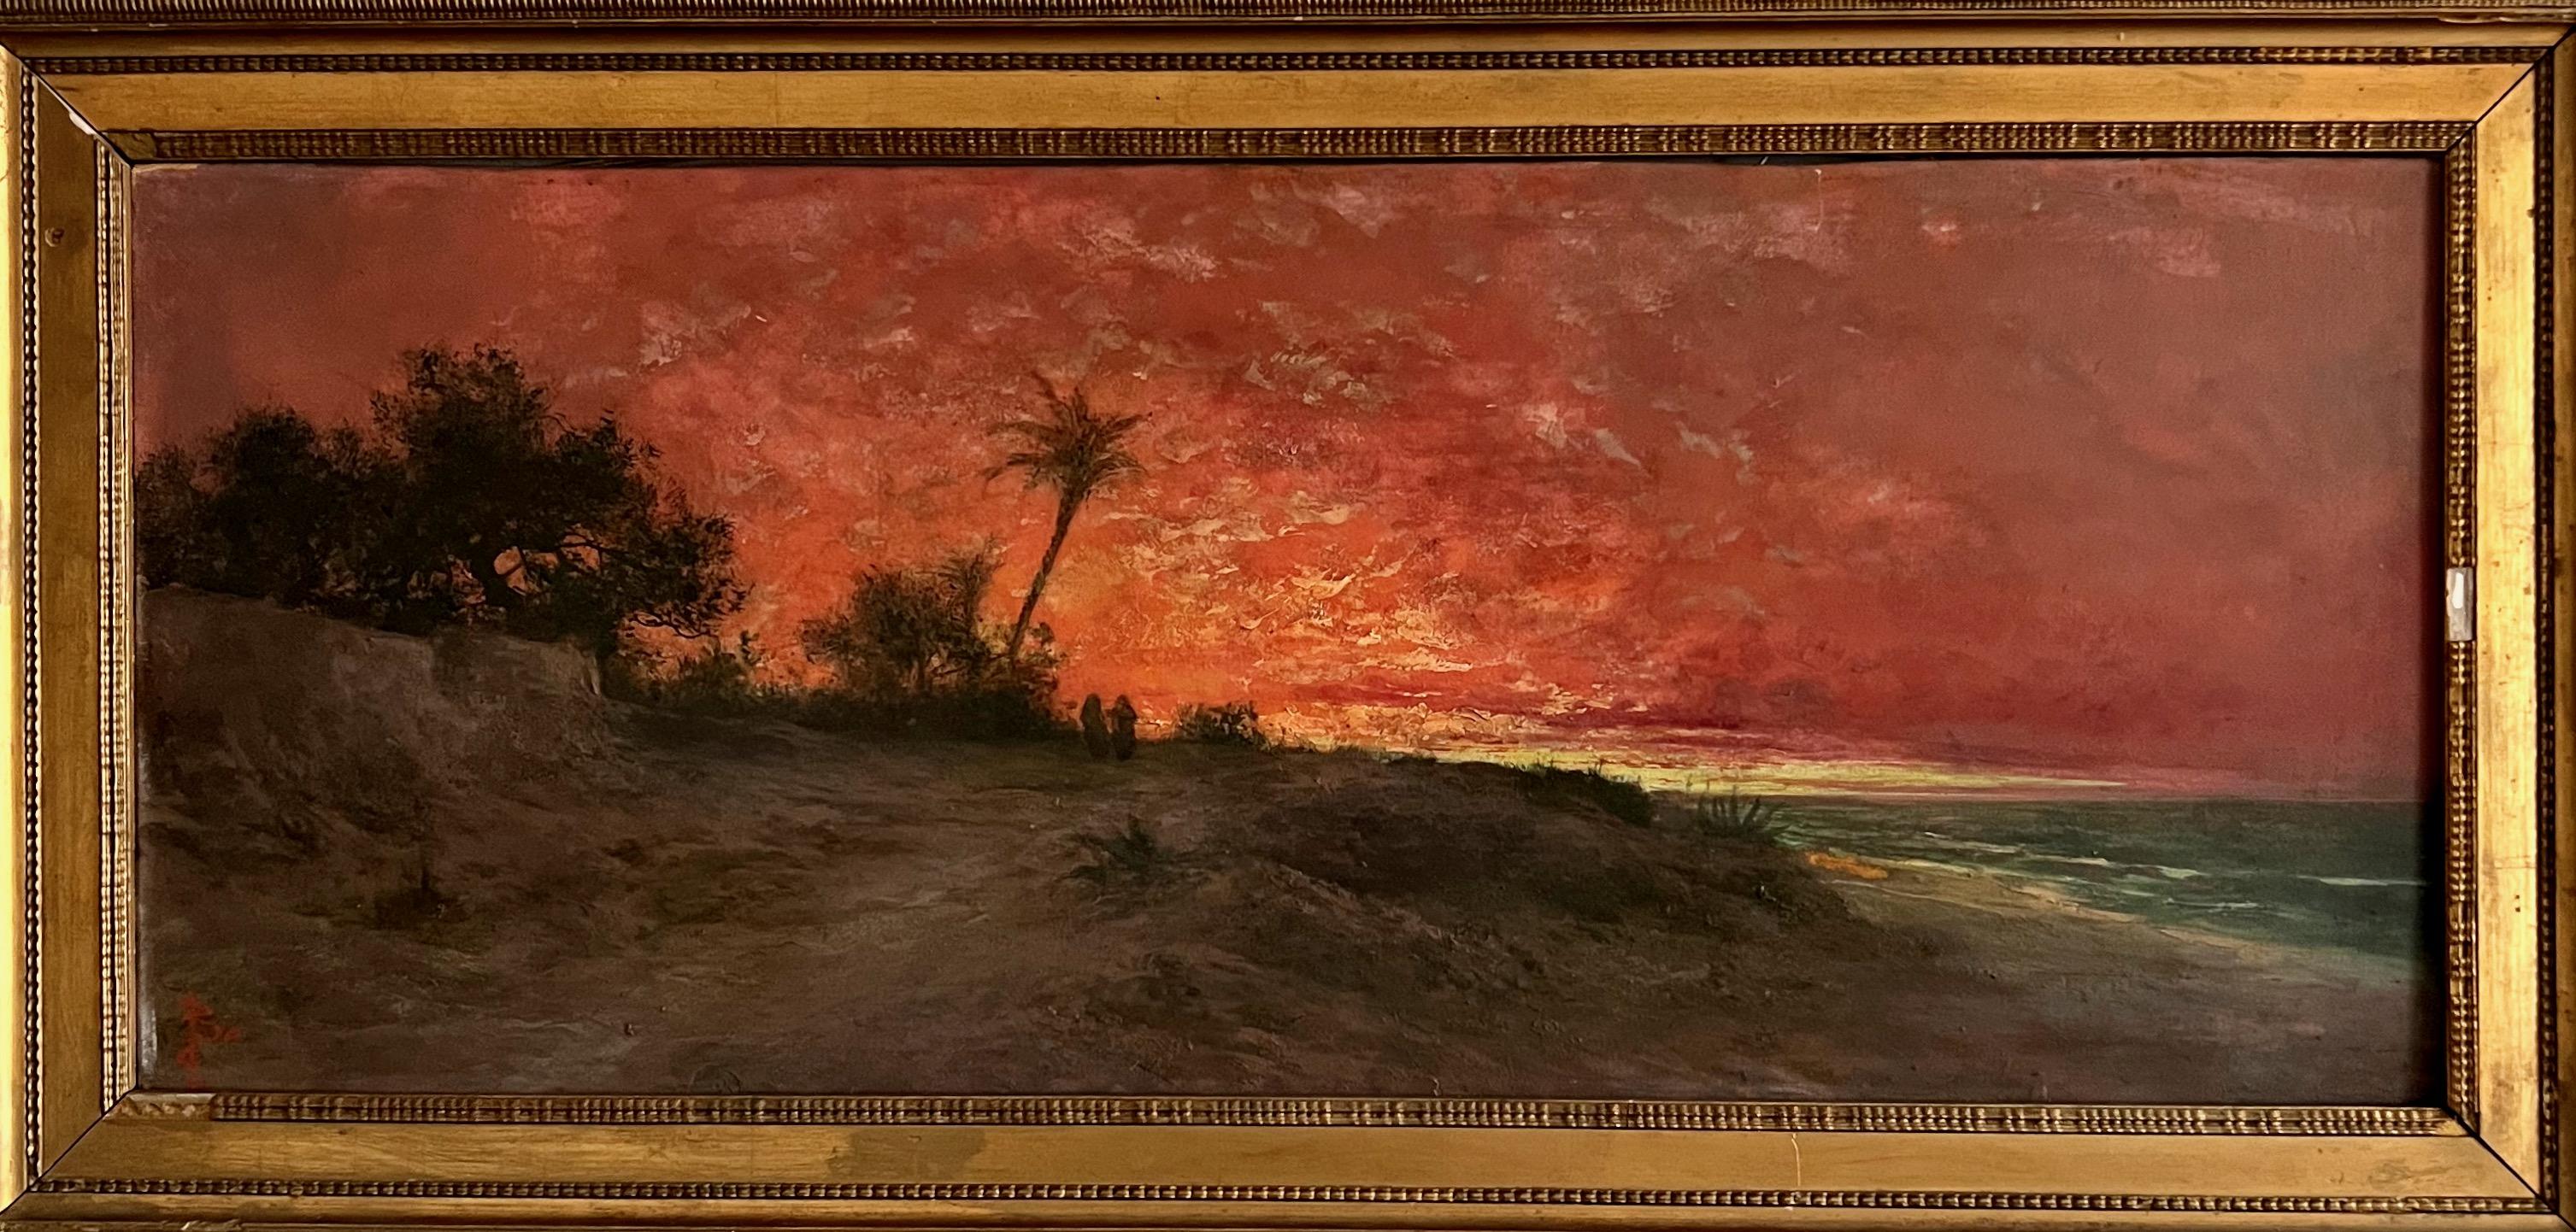 A fine painting depicting an oriental shoreline sunset with red skies and two oriental women walking towards their village by the beach and sea. Oil on cardboard by an unidentified artist. Signed with monogram. The somewhat long rectangular shape